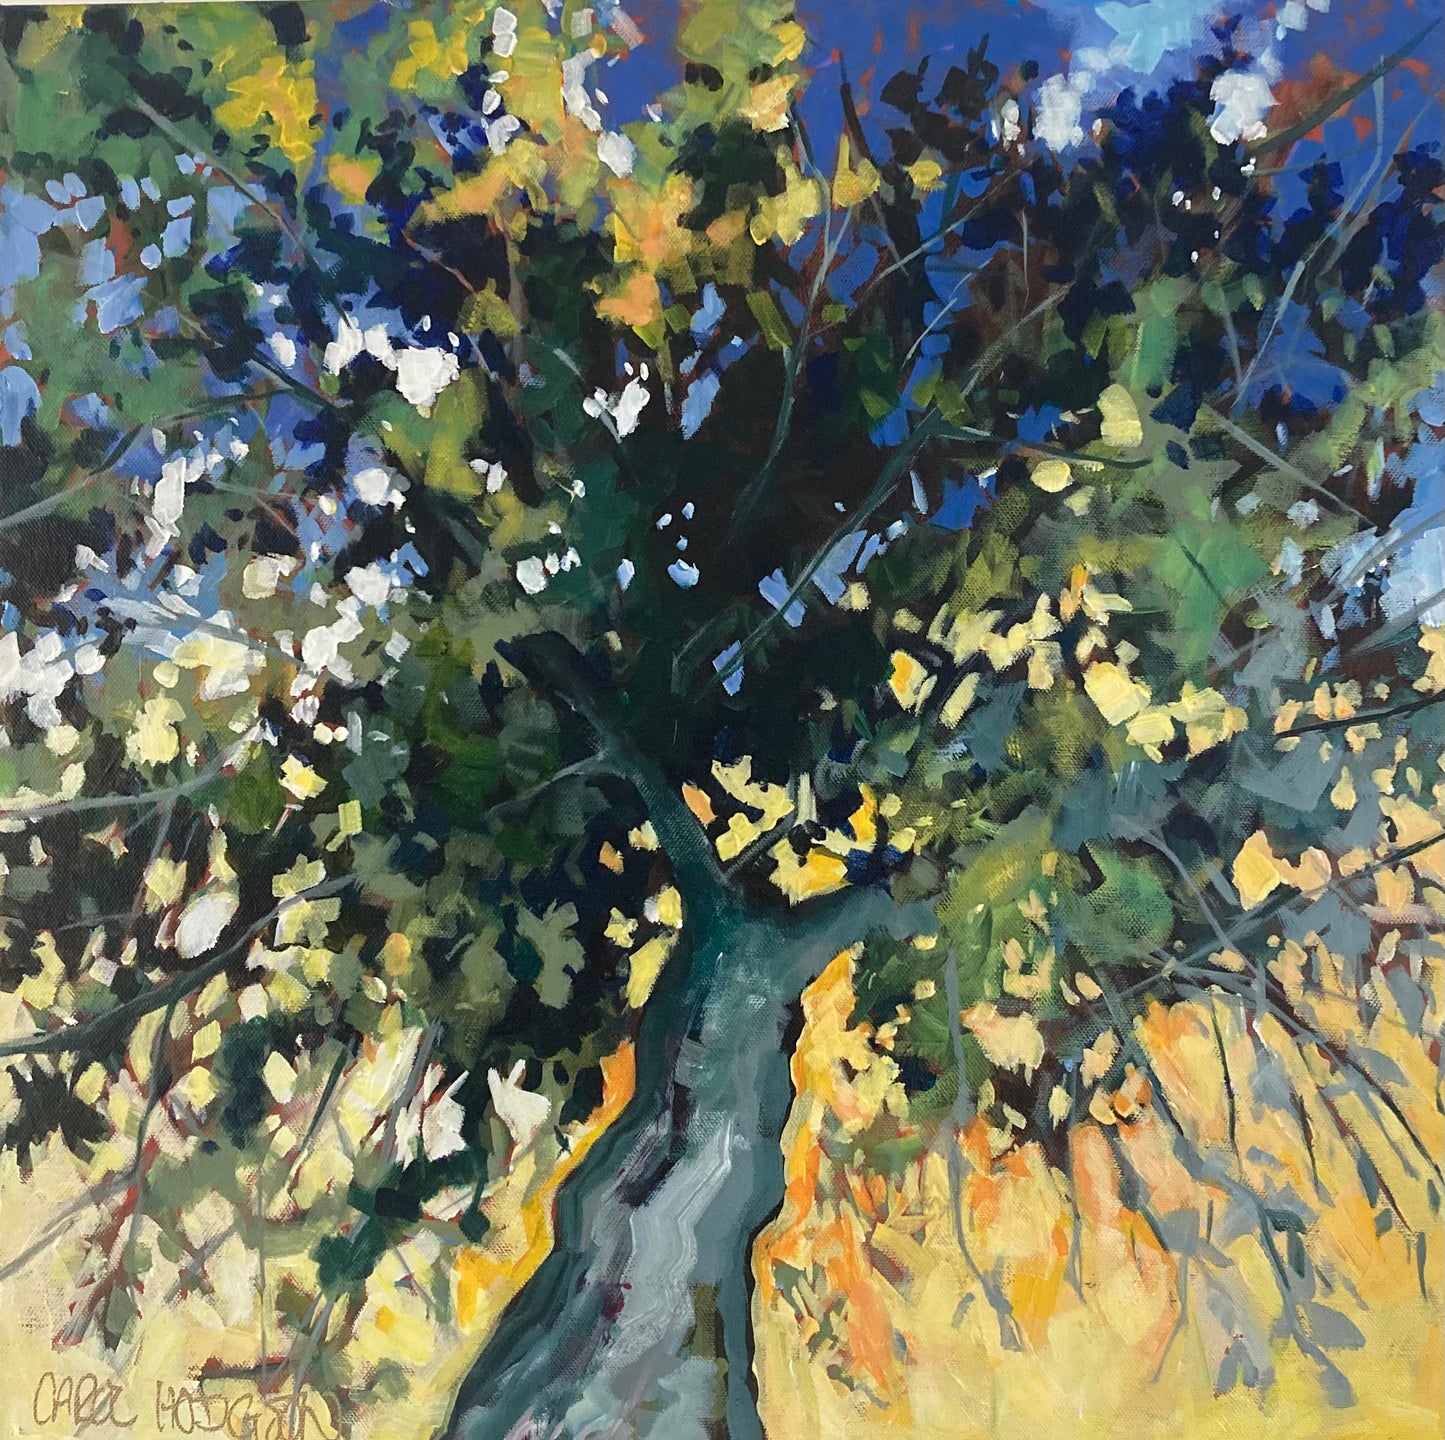 Image of acrylic painting of looking up into tree canopy.